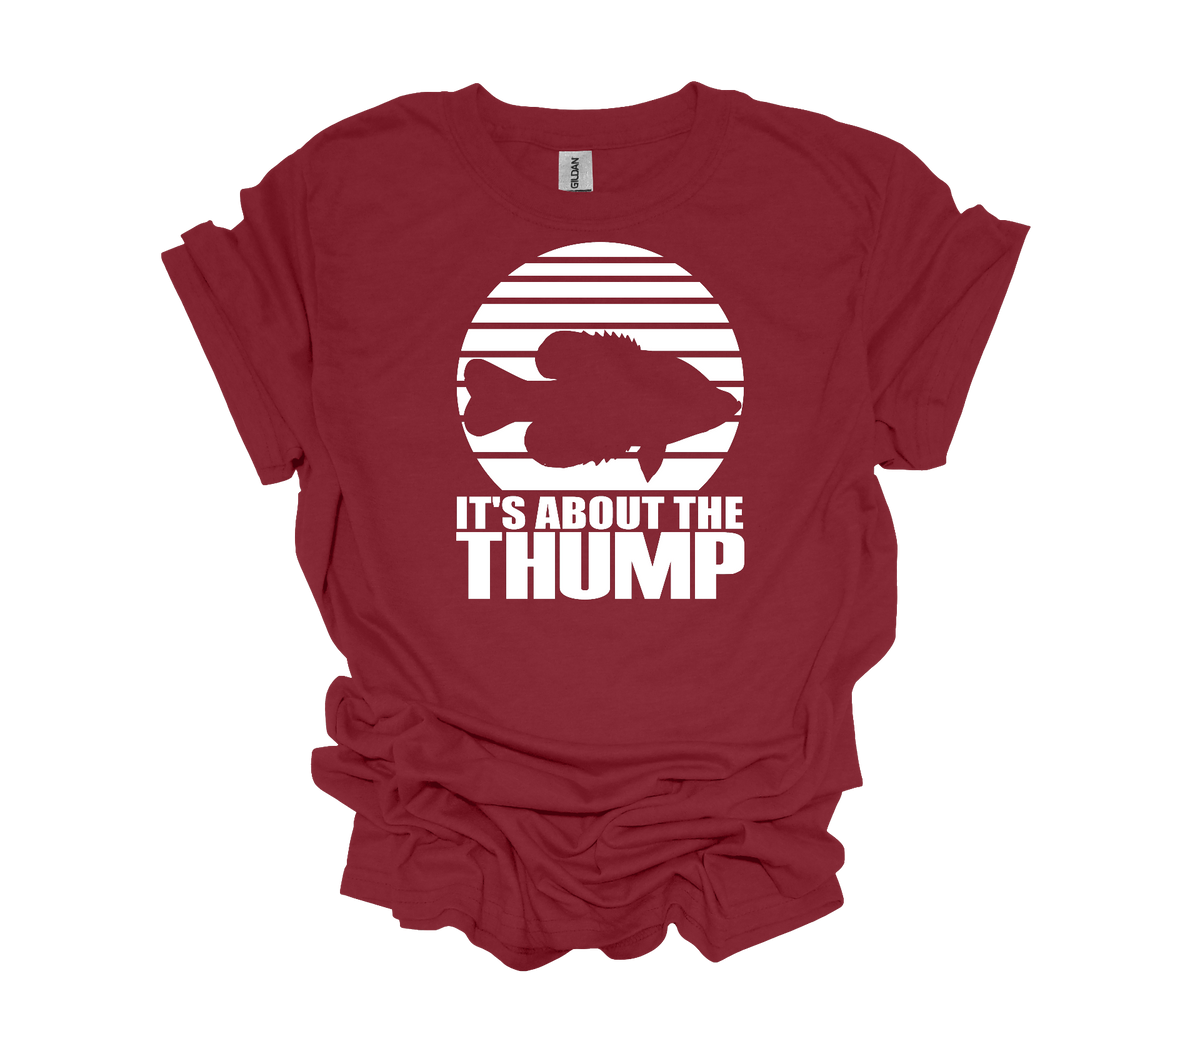 It's About the Thump – Taylor'd Tee